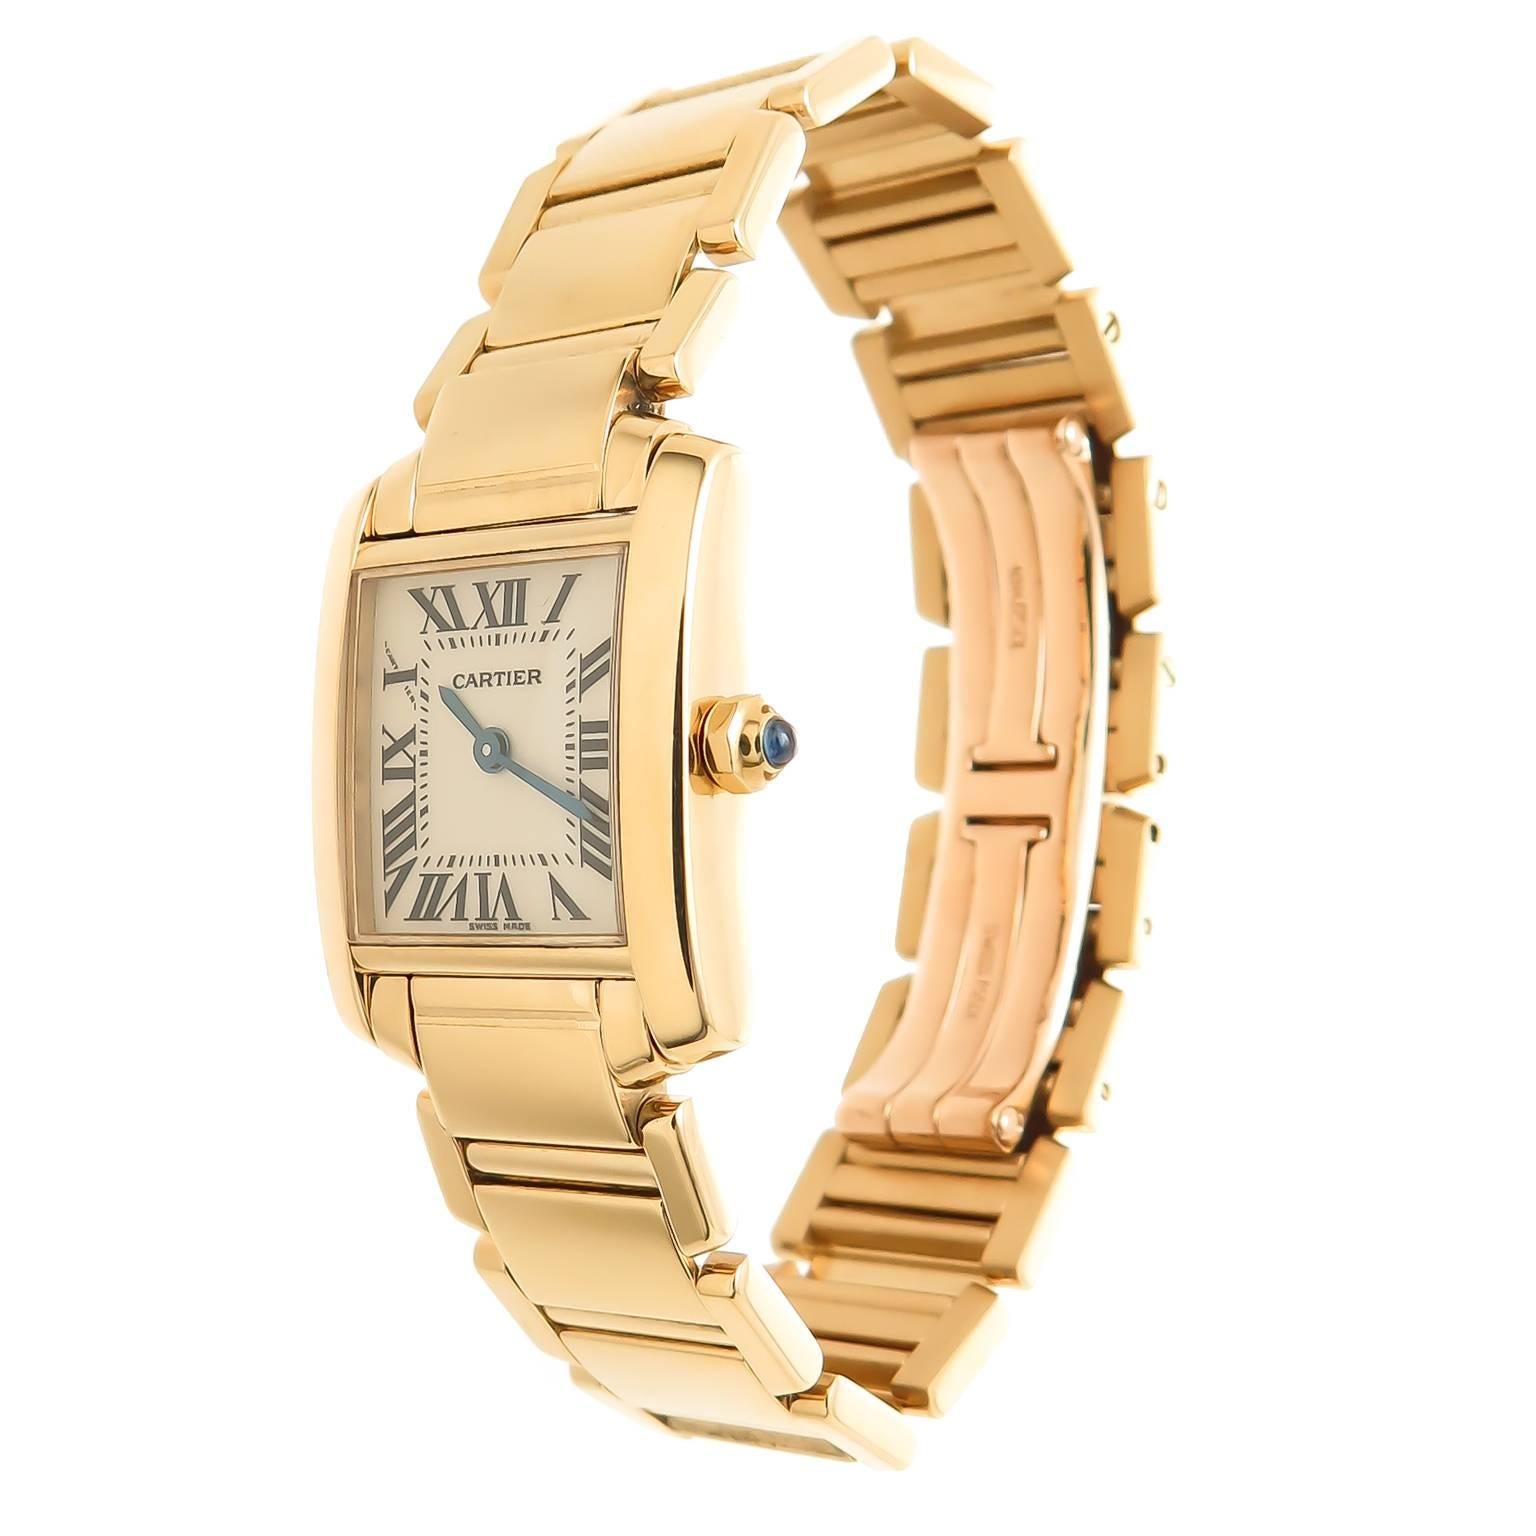 Circa 2012 Cartier 18K yellow Gold Tank Francaise ladies Wrist watch, 25 X 20 MM water Resistant case, Quartz Movement, White Dial with Black Roman numerals, Scratch resistant crystal and a Blue Spinel crown. 5/8 inch wide bracelet with deployment